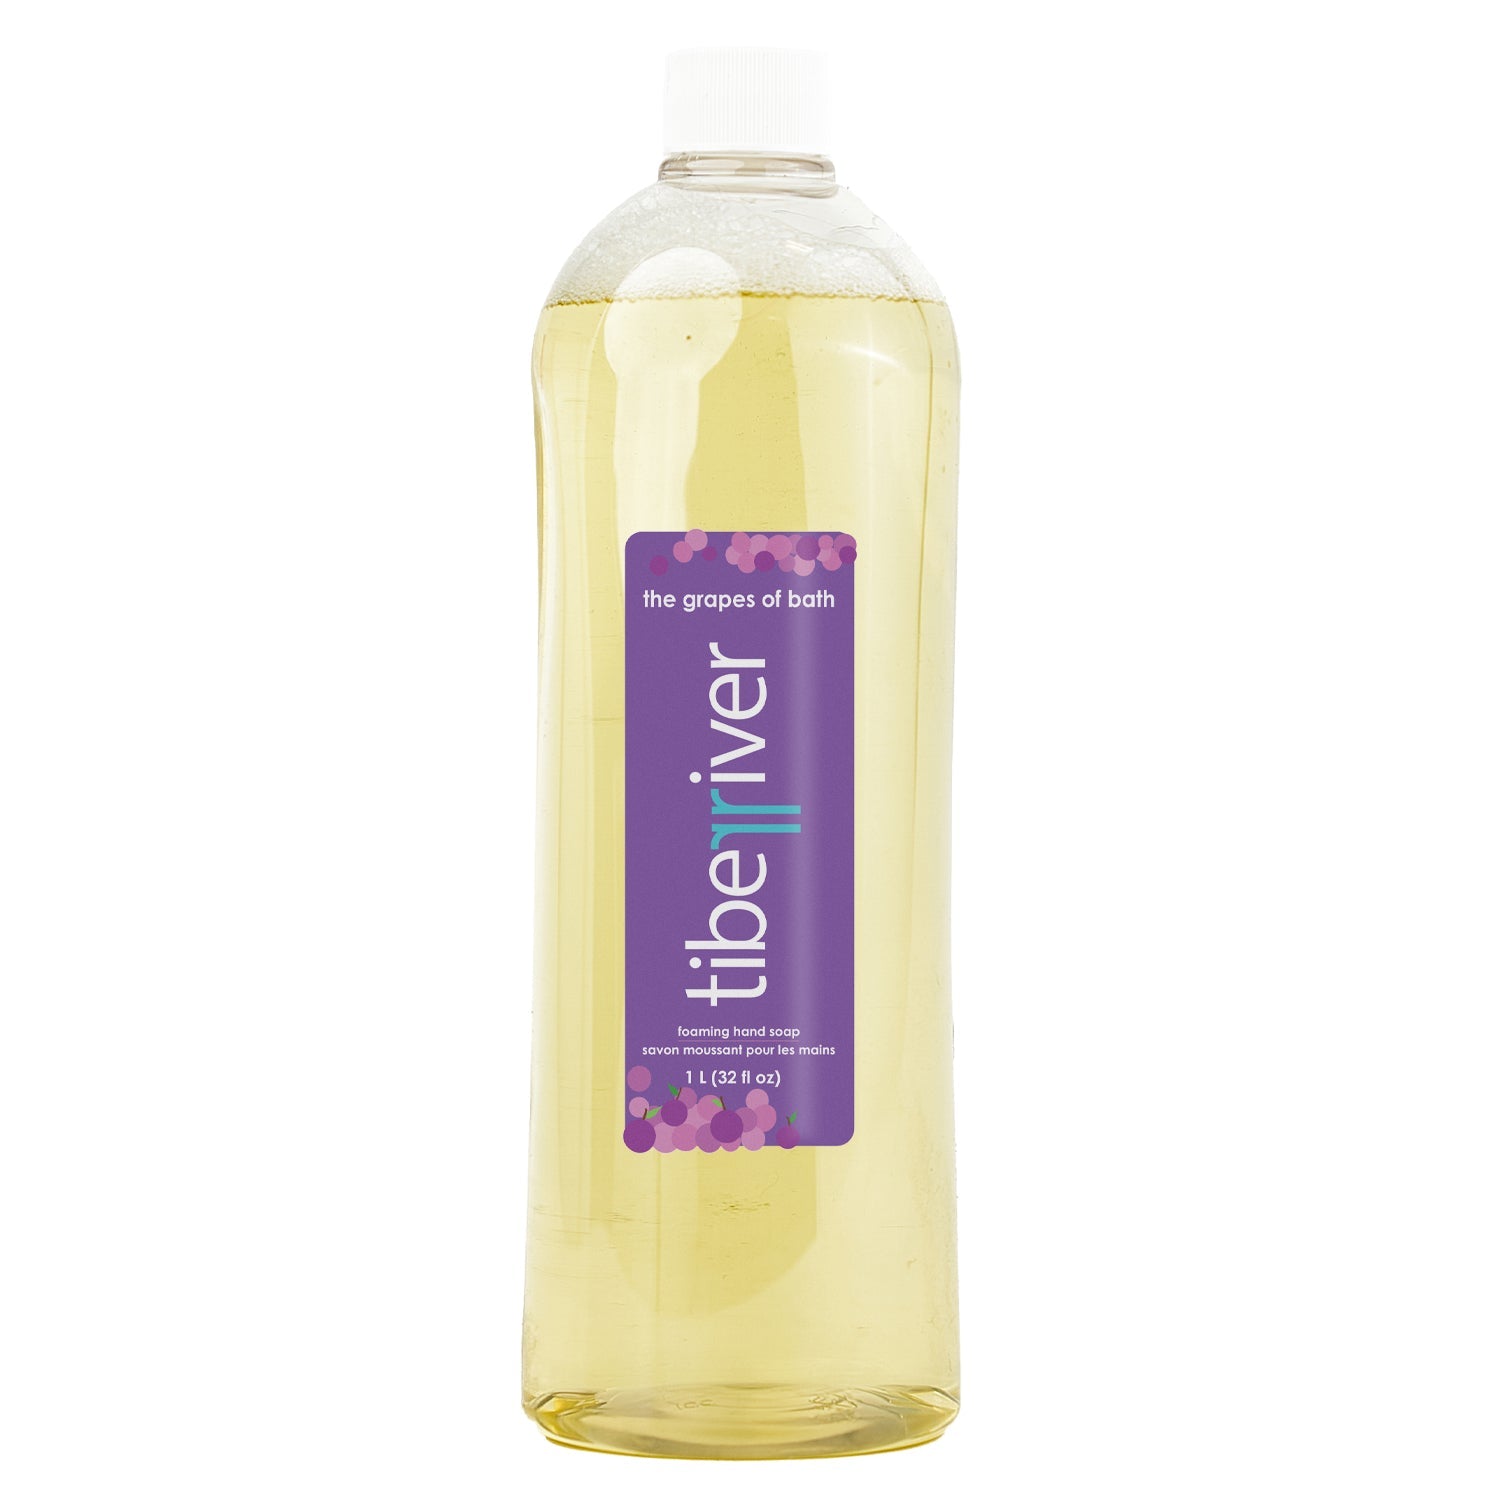 The Grapes of Bath Foaming Hand Soap